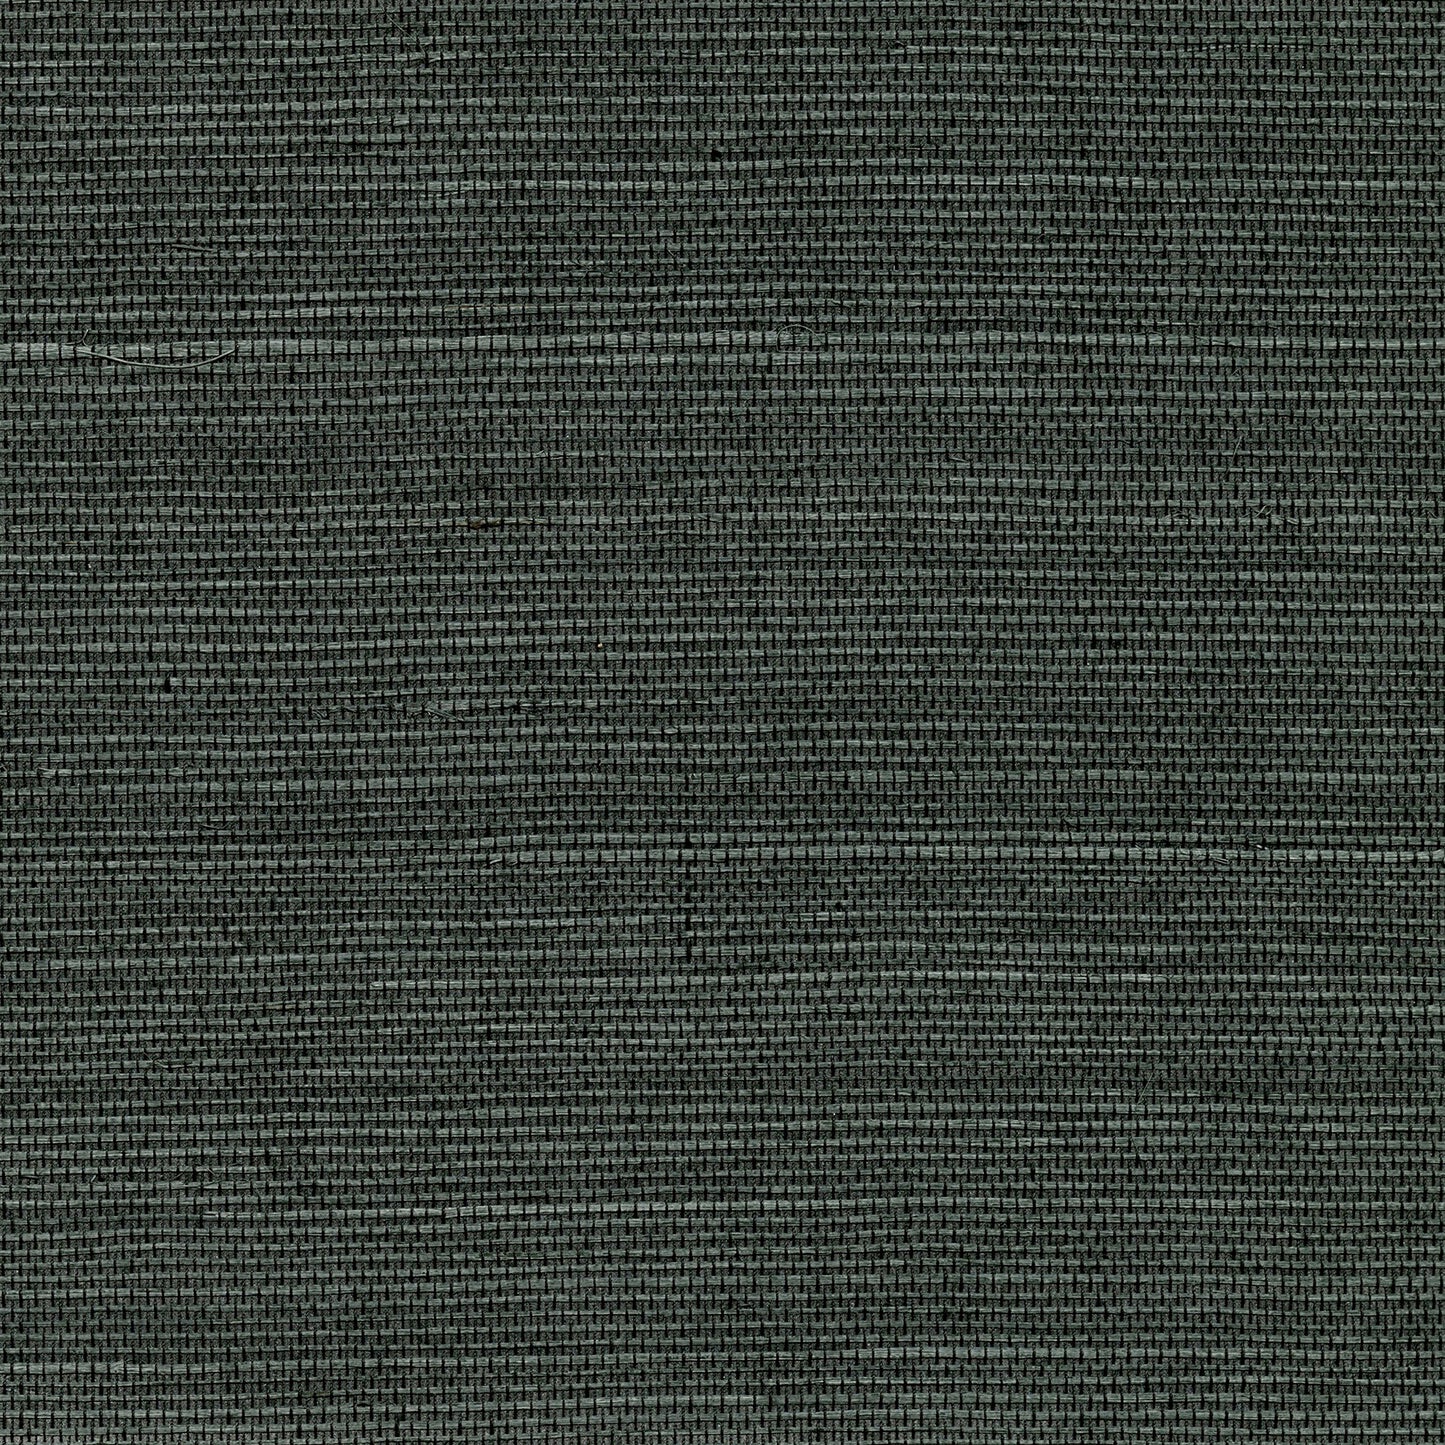 View 4018-0033 Grasscloth Portfolio Kowloon Charcoal Sisal Grasscloth Charcoal by Advantage